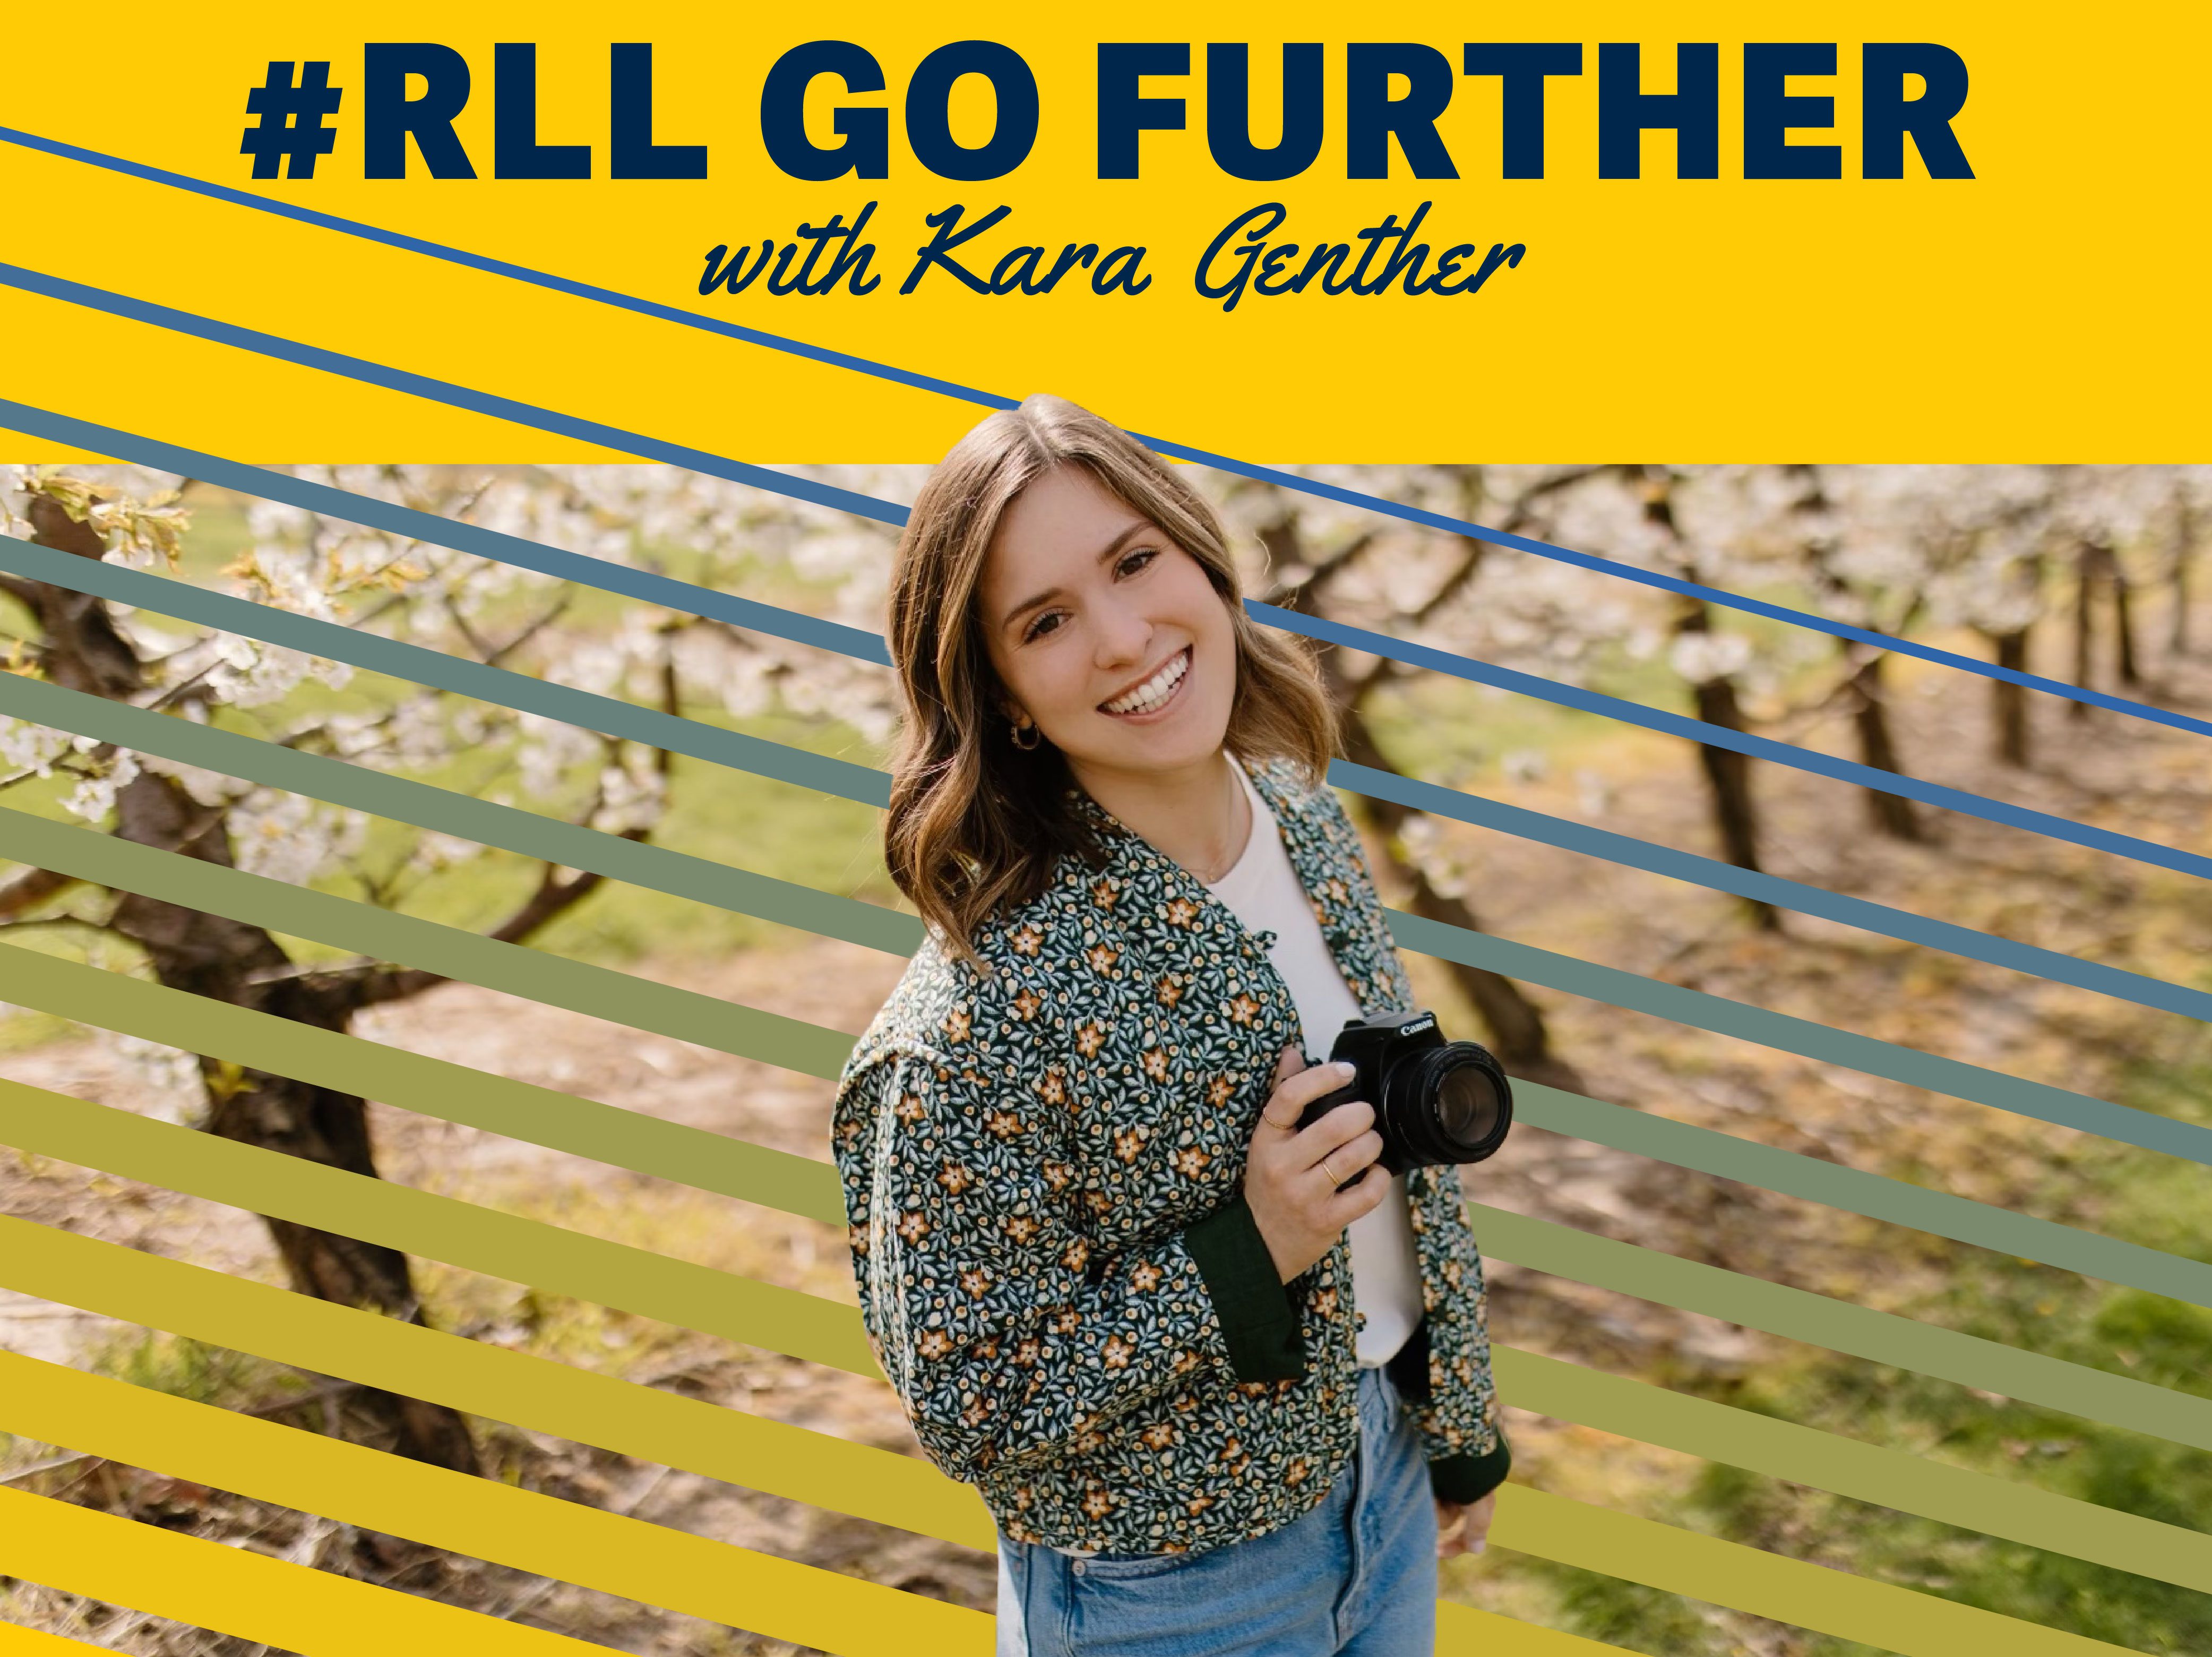 RLL Go Further with Kara Genther